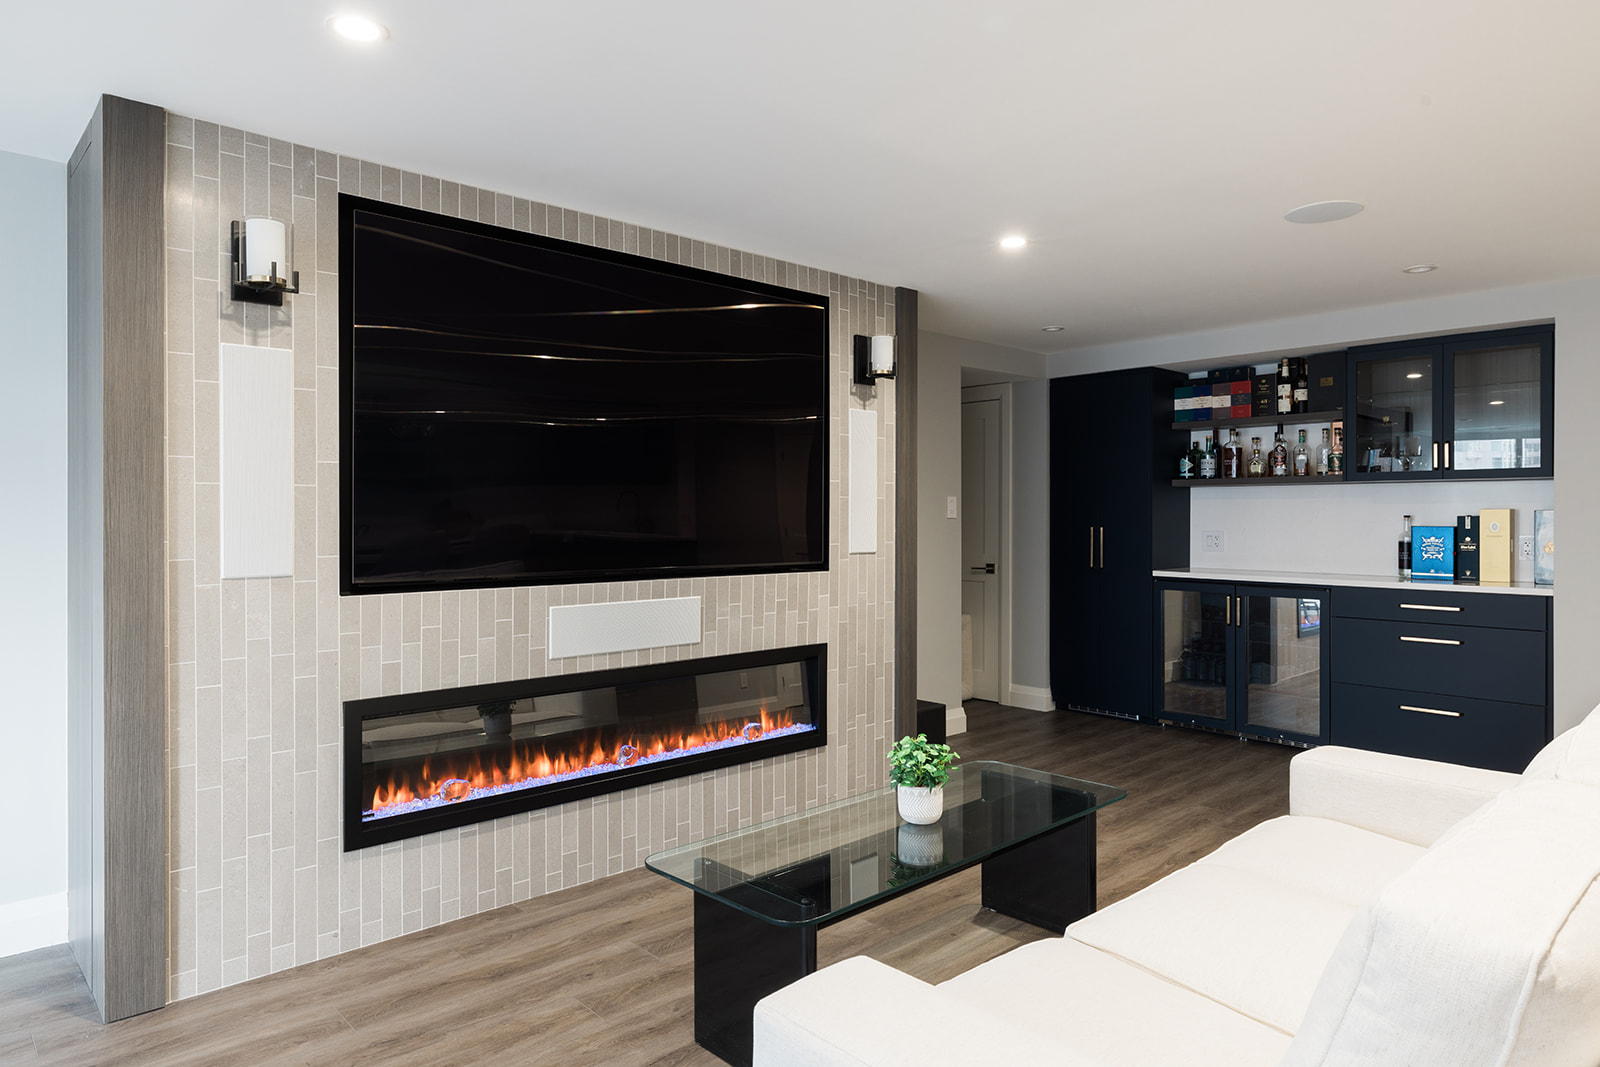 View of custom fireplace in luxury downtown Toronto condo renovation in living room area with mounted flatscreen TV